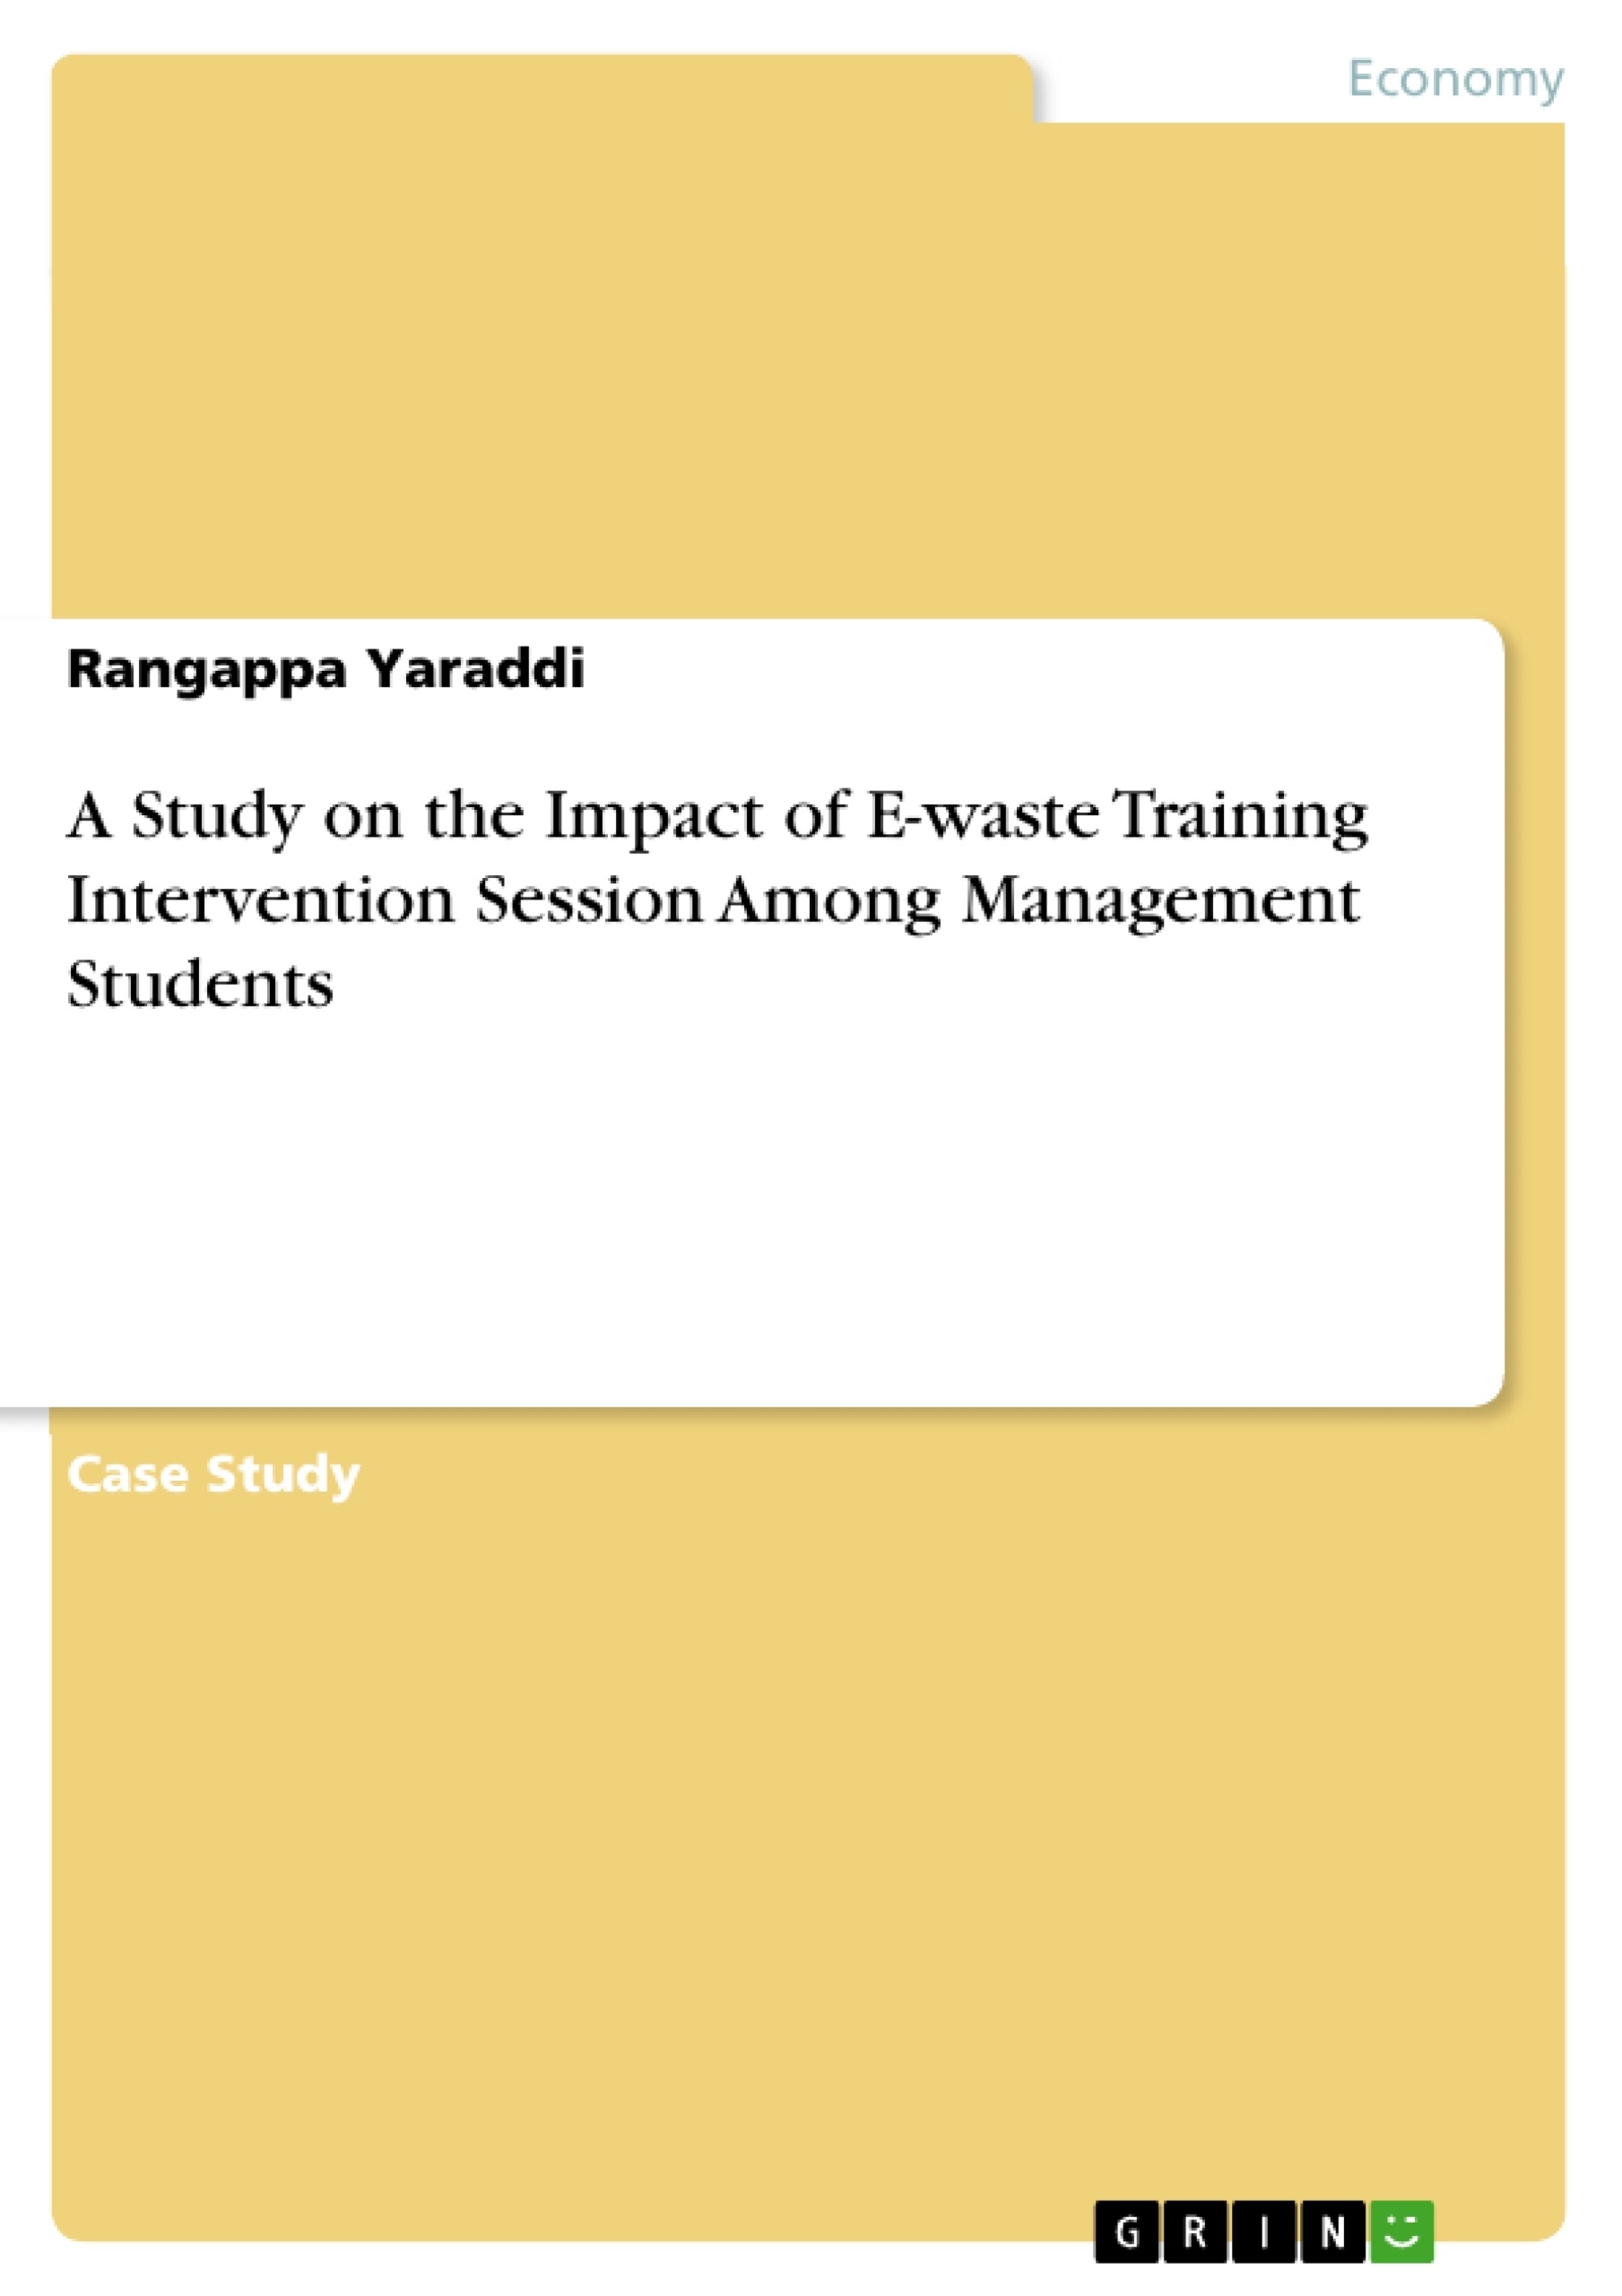 Titre: A Study on the Impact of E-waste Training Intervention Session Among Management Students